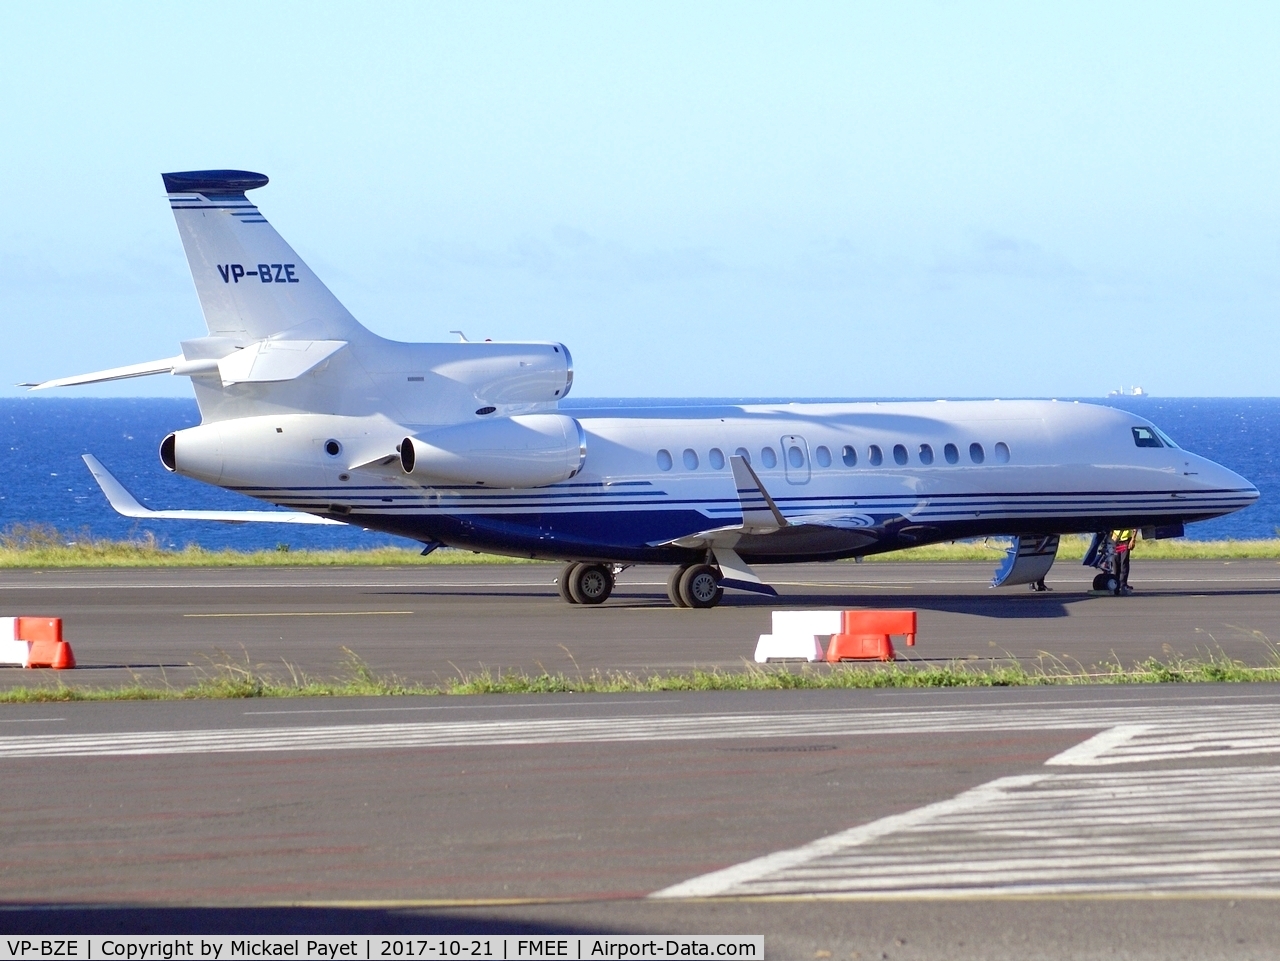 VP-BZE, 2007 Dassault Falcon 7X C/N 14, At stand 10A